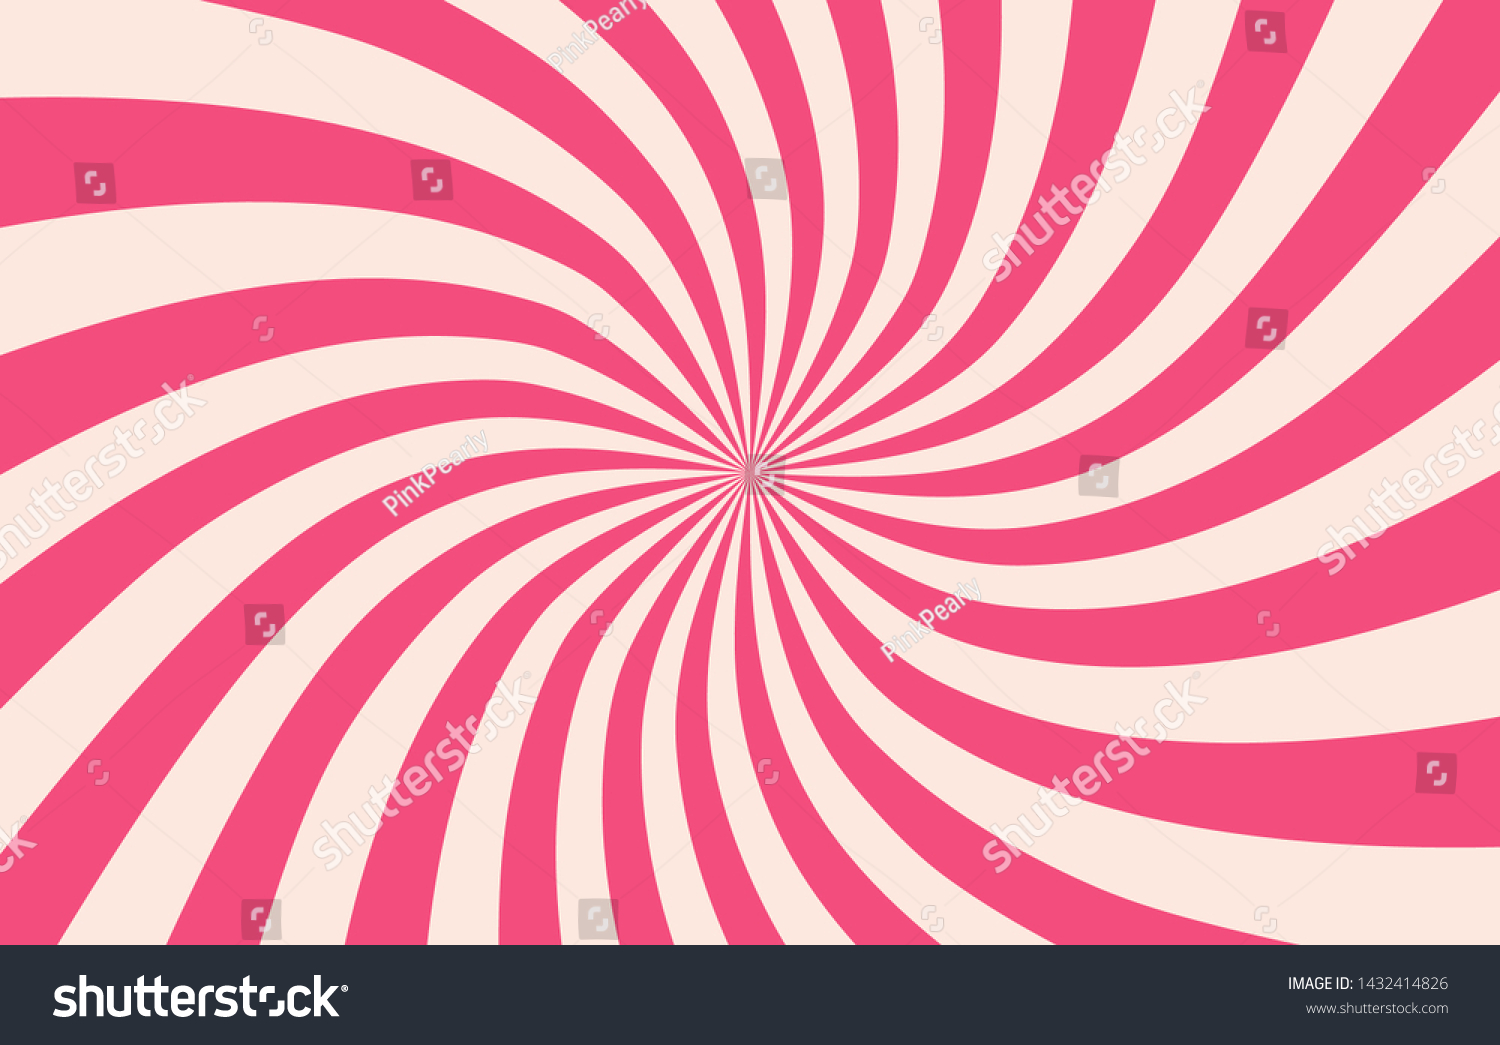 241,696 Candy wallpapers Images, Stock Photos & Vectors | Shutterstock